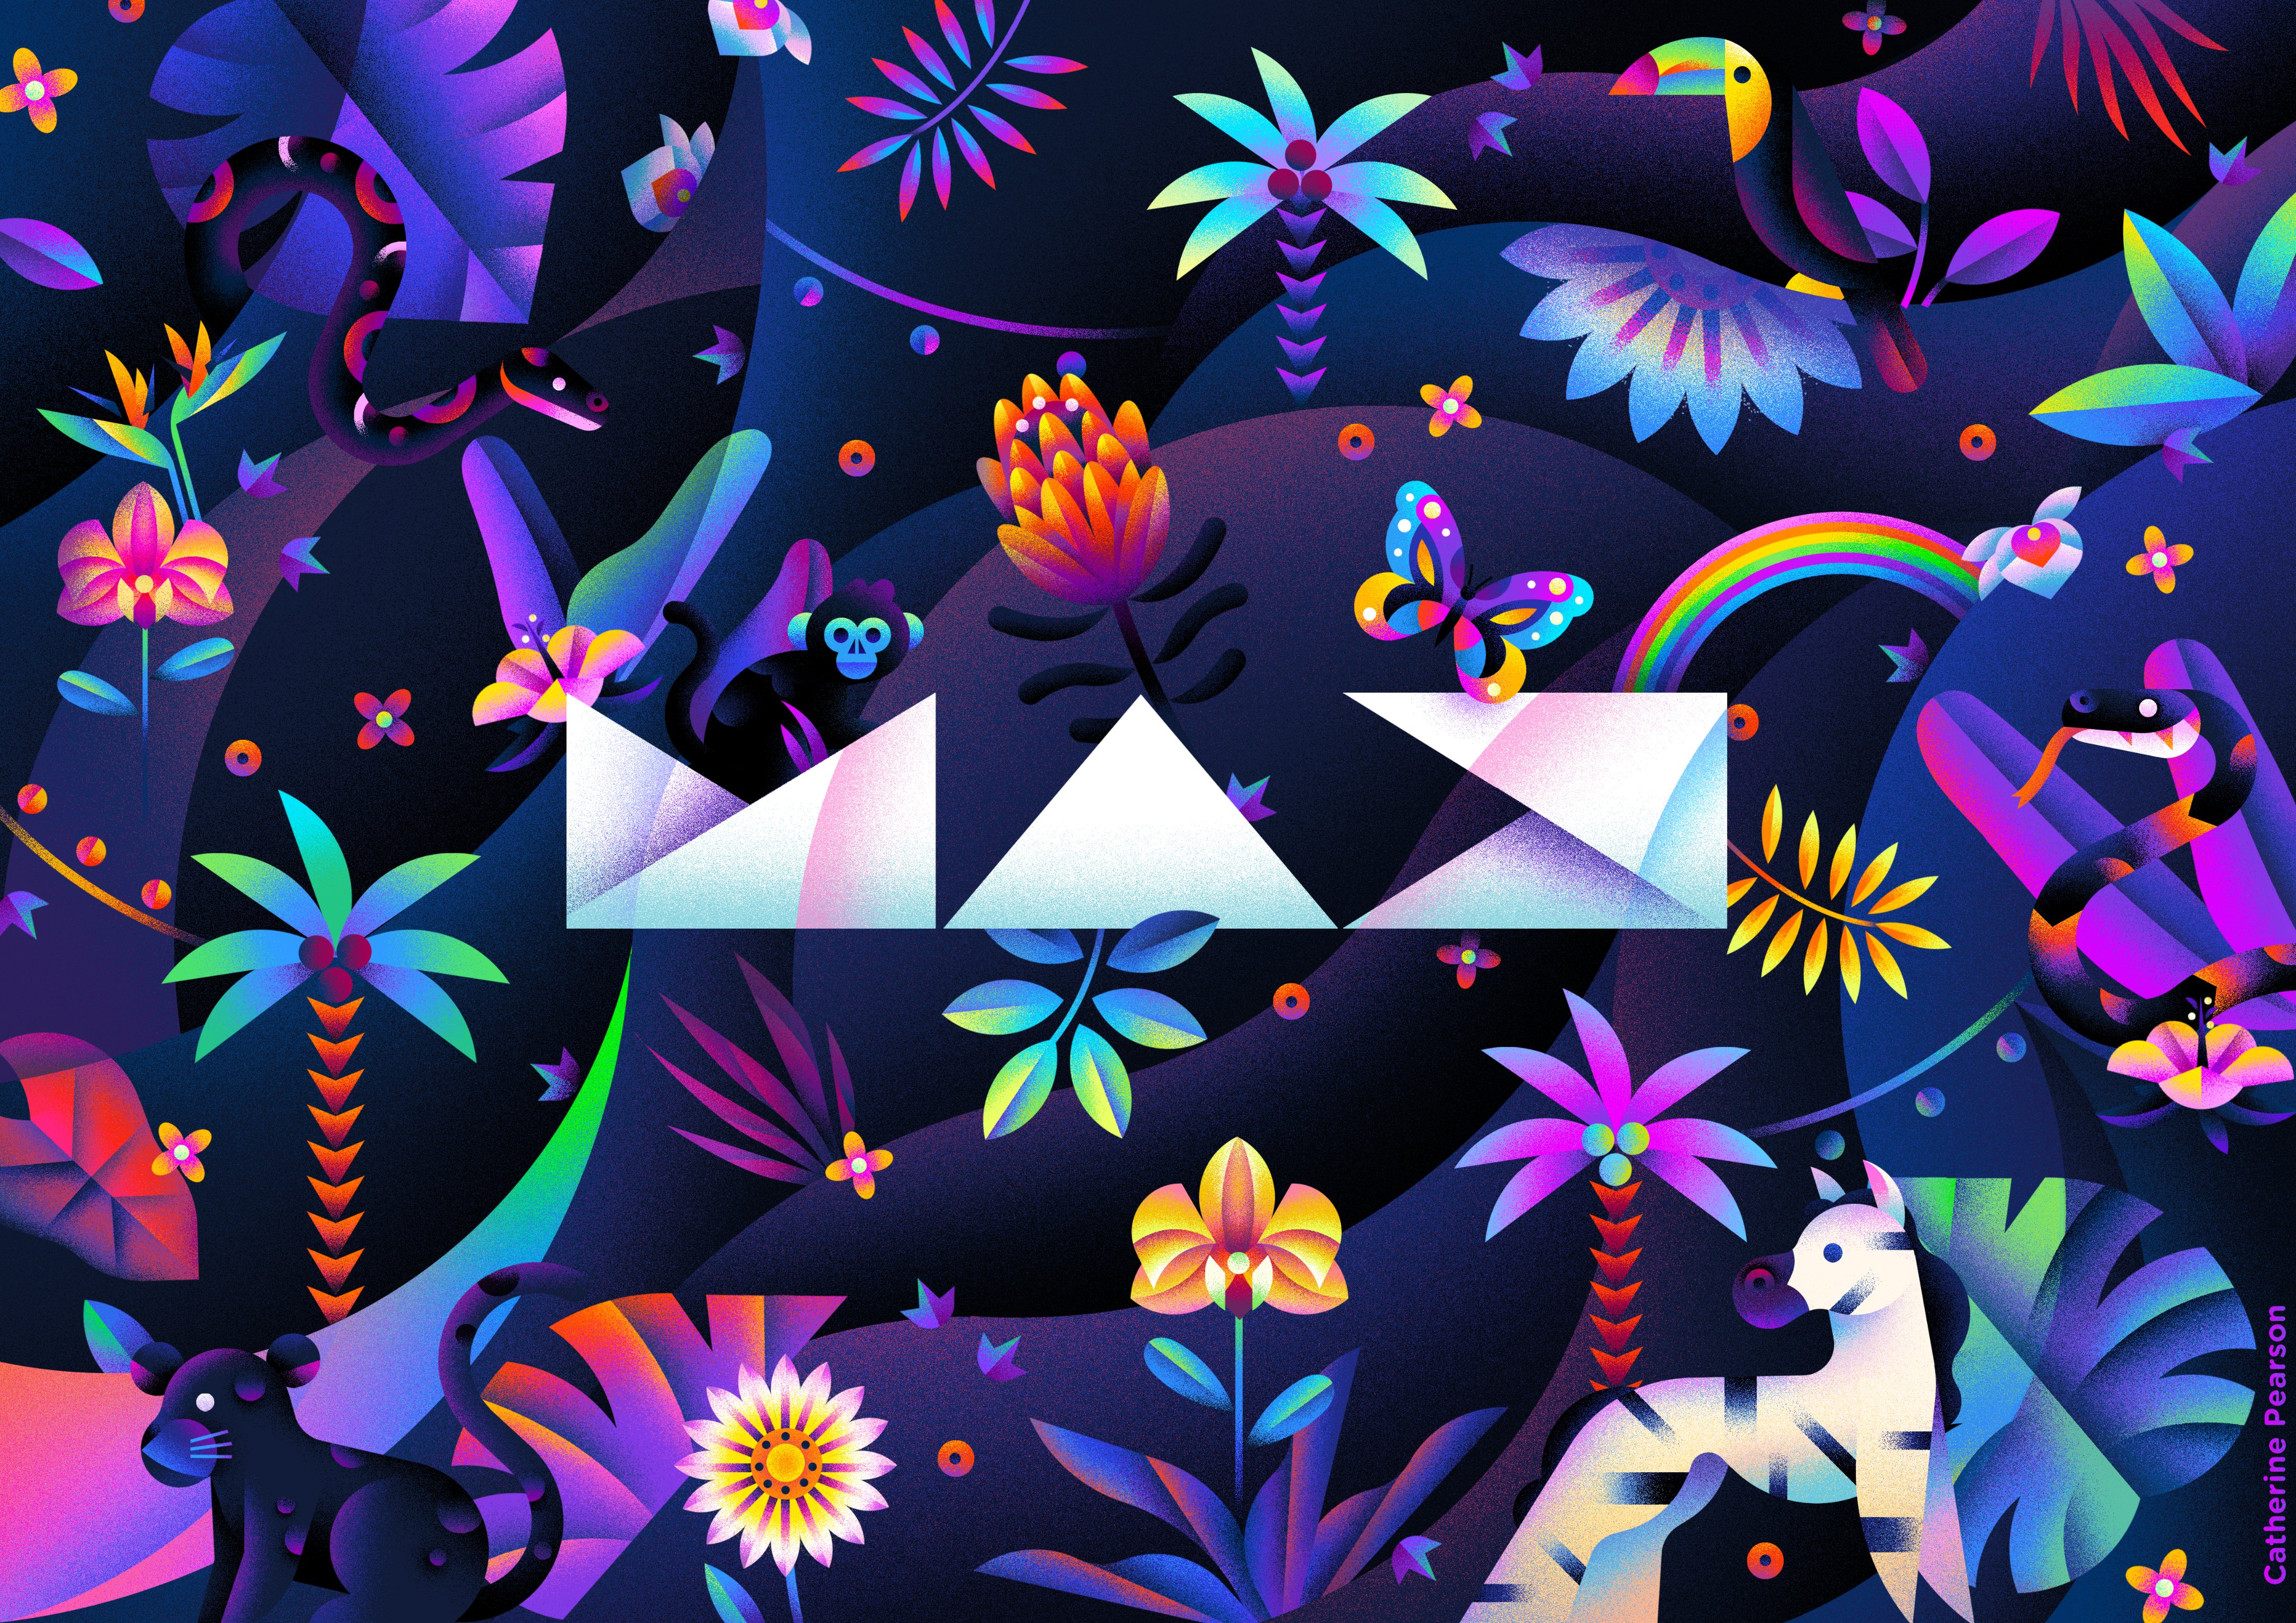 Behance jungle #AdobeMAX wallpaper cocreated with illustrator Catherine Pearson